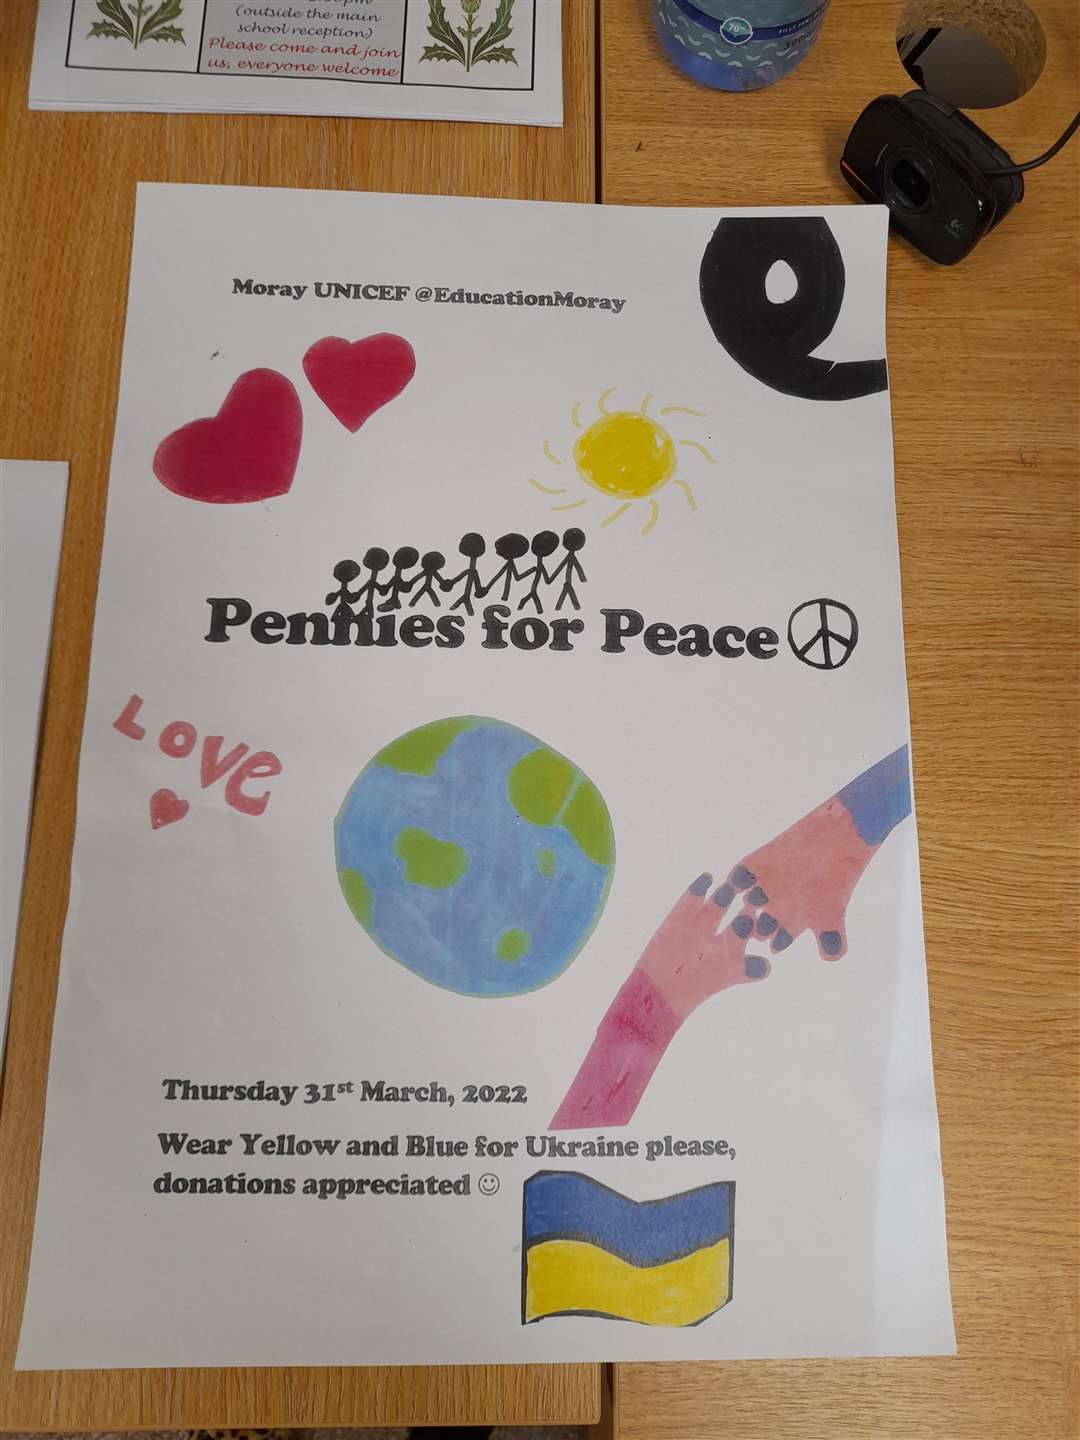 A poster for the event, designed by Seafield Primary School pupil Harley Lauchlan.